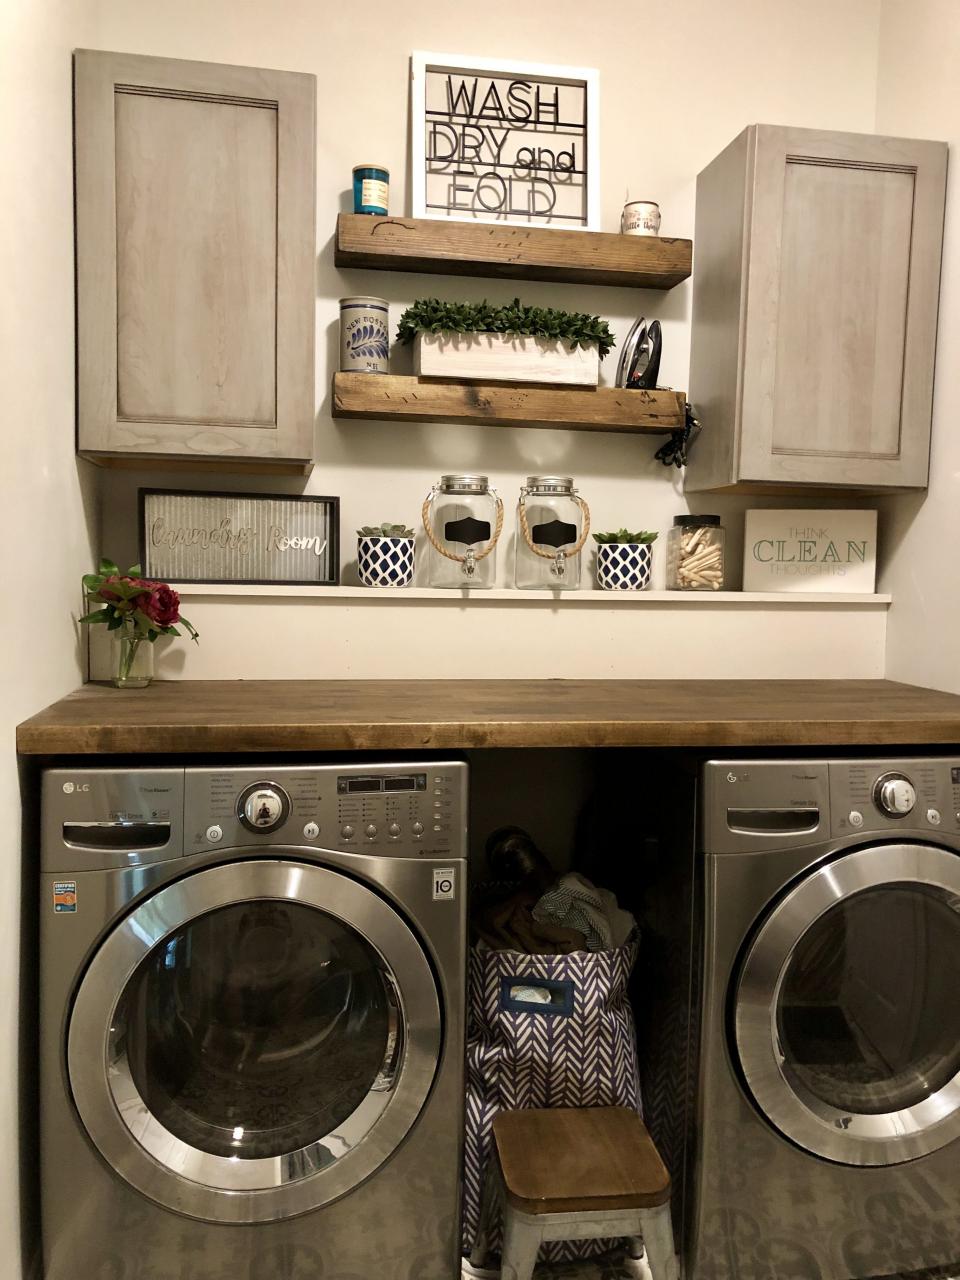 Laundry Room DIY Laundry room diy, Rustic laundry rooms, Small